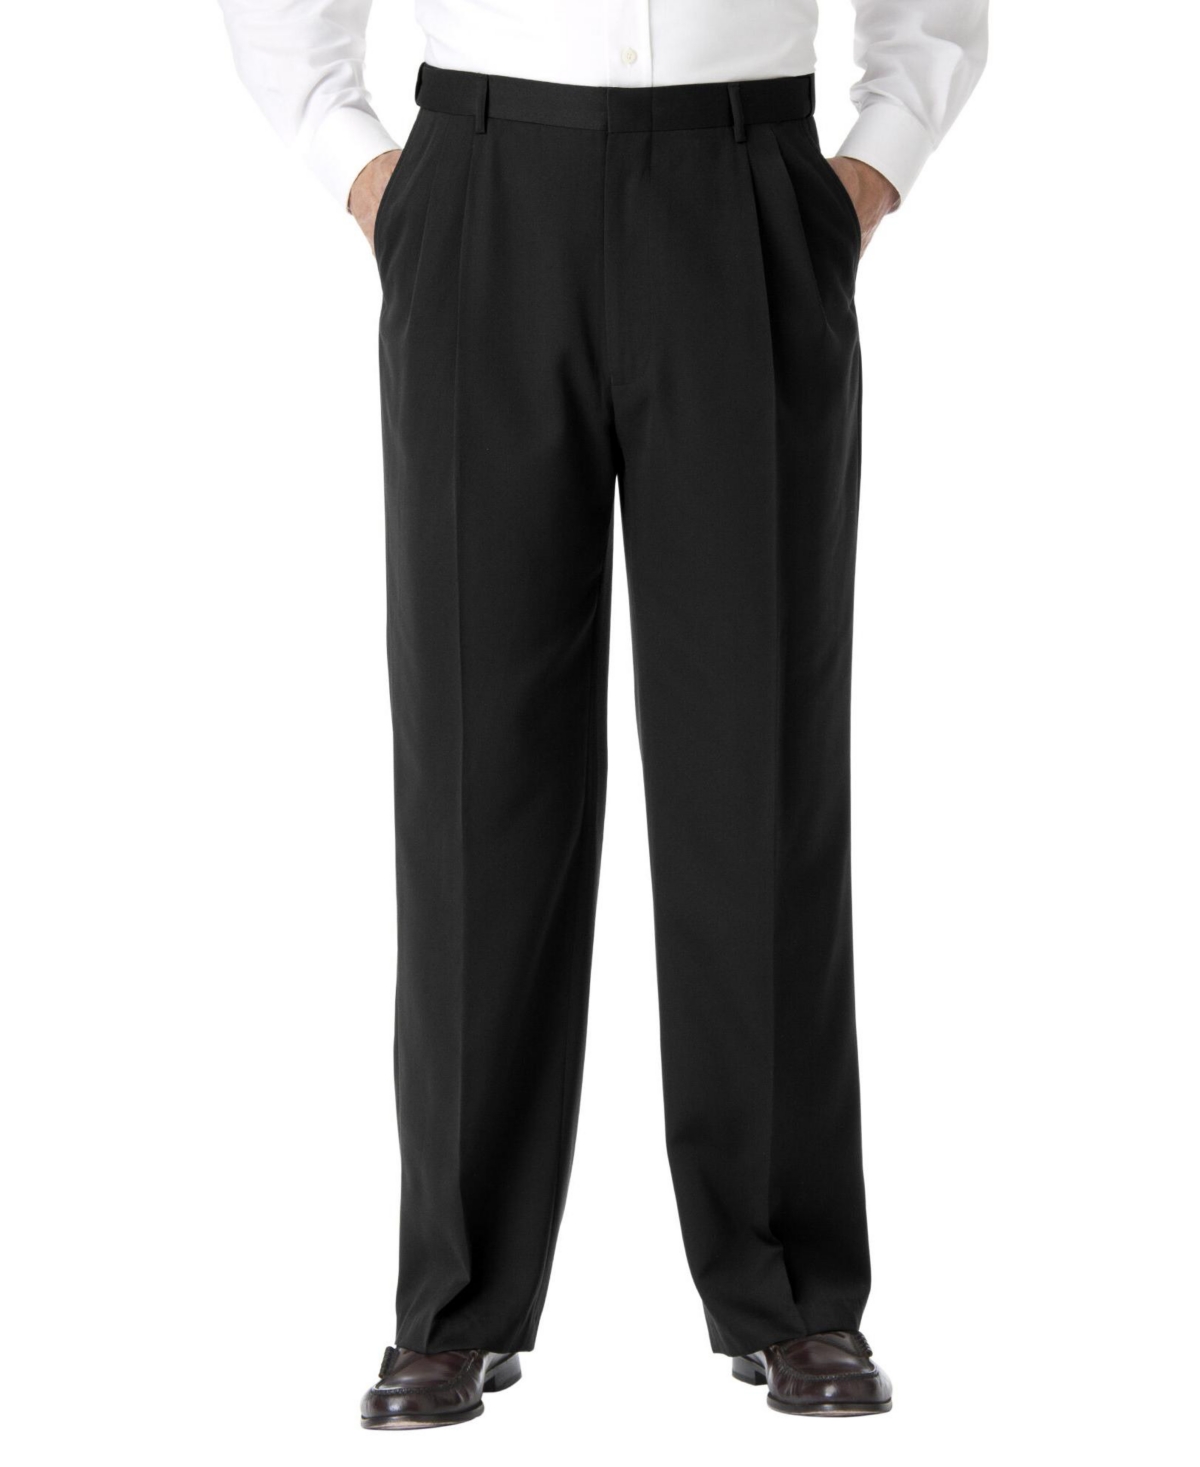 Big & Tall Ks Signature Collection No Hassle Classic Fit Expandable Waist Double-Pleat Dress Pants - Navy